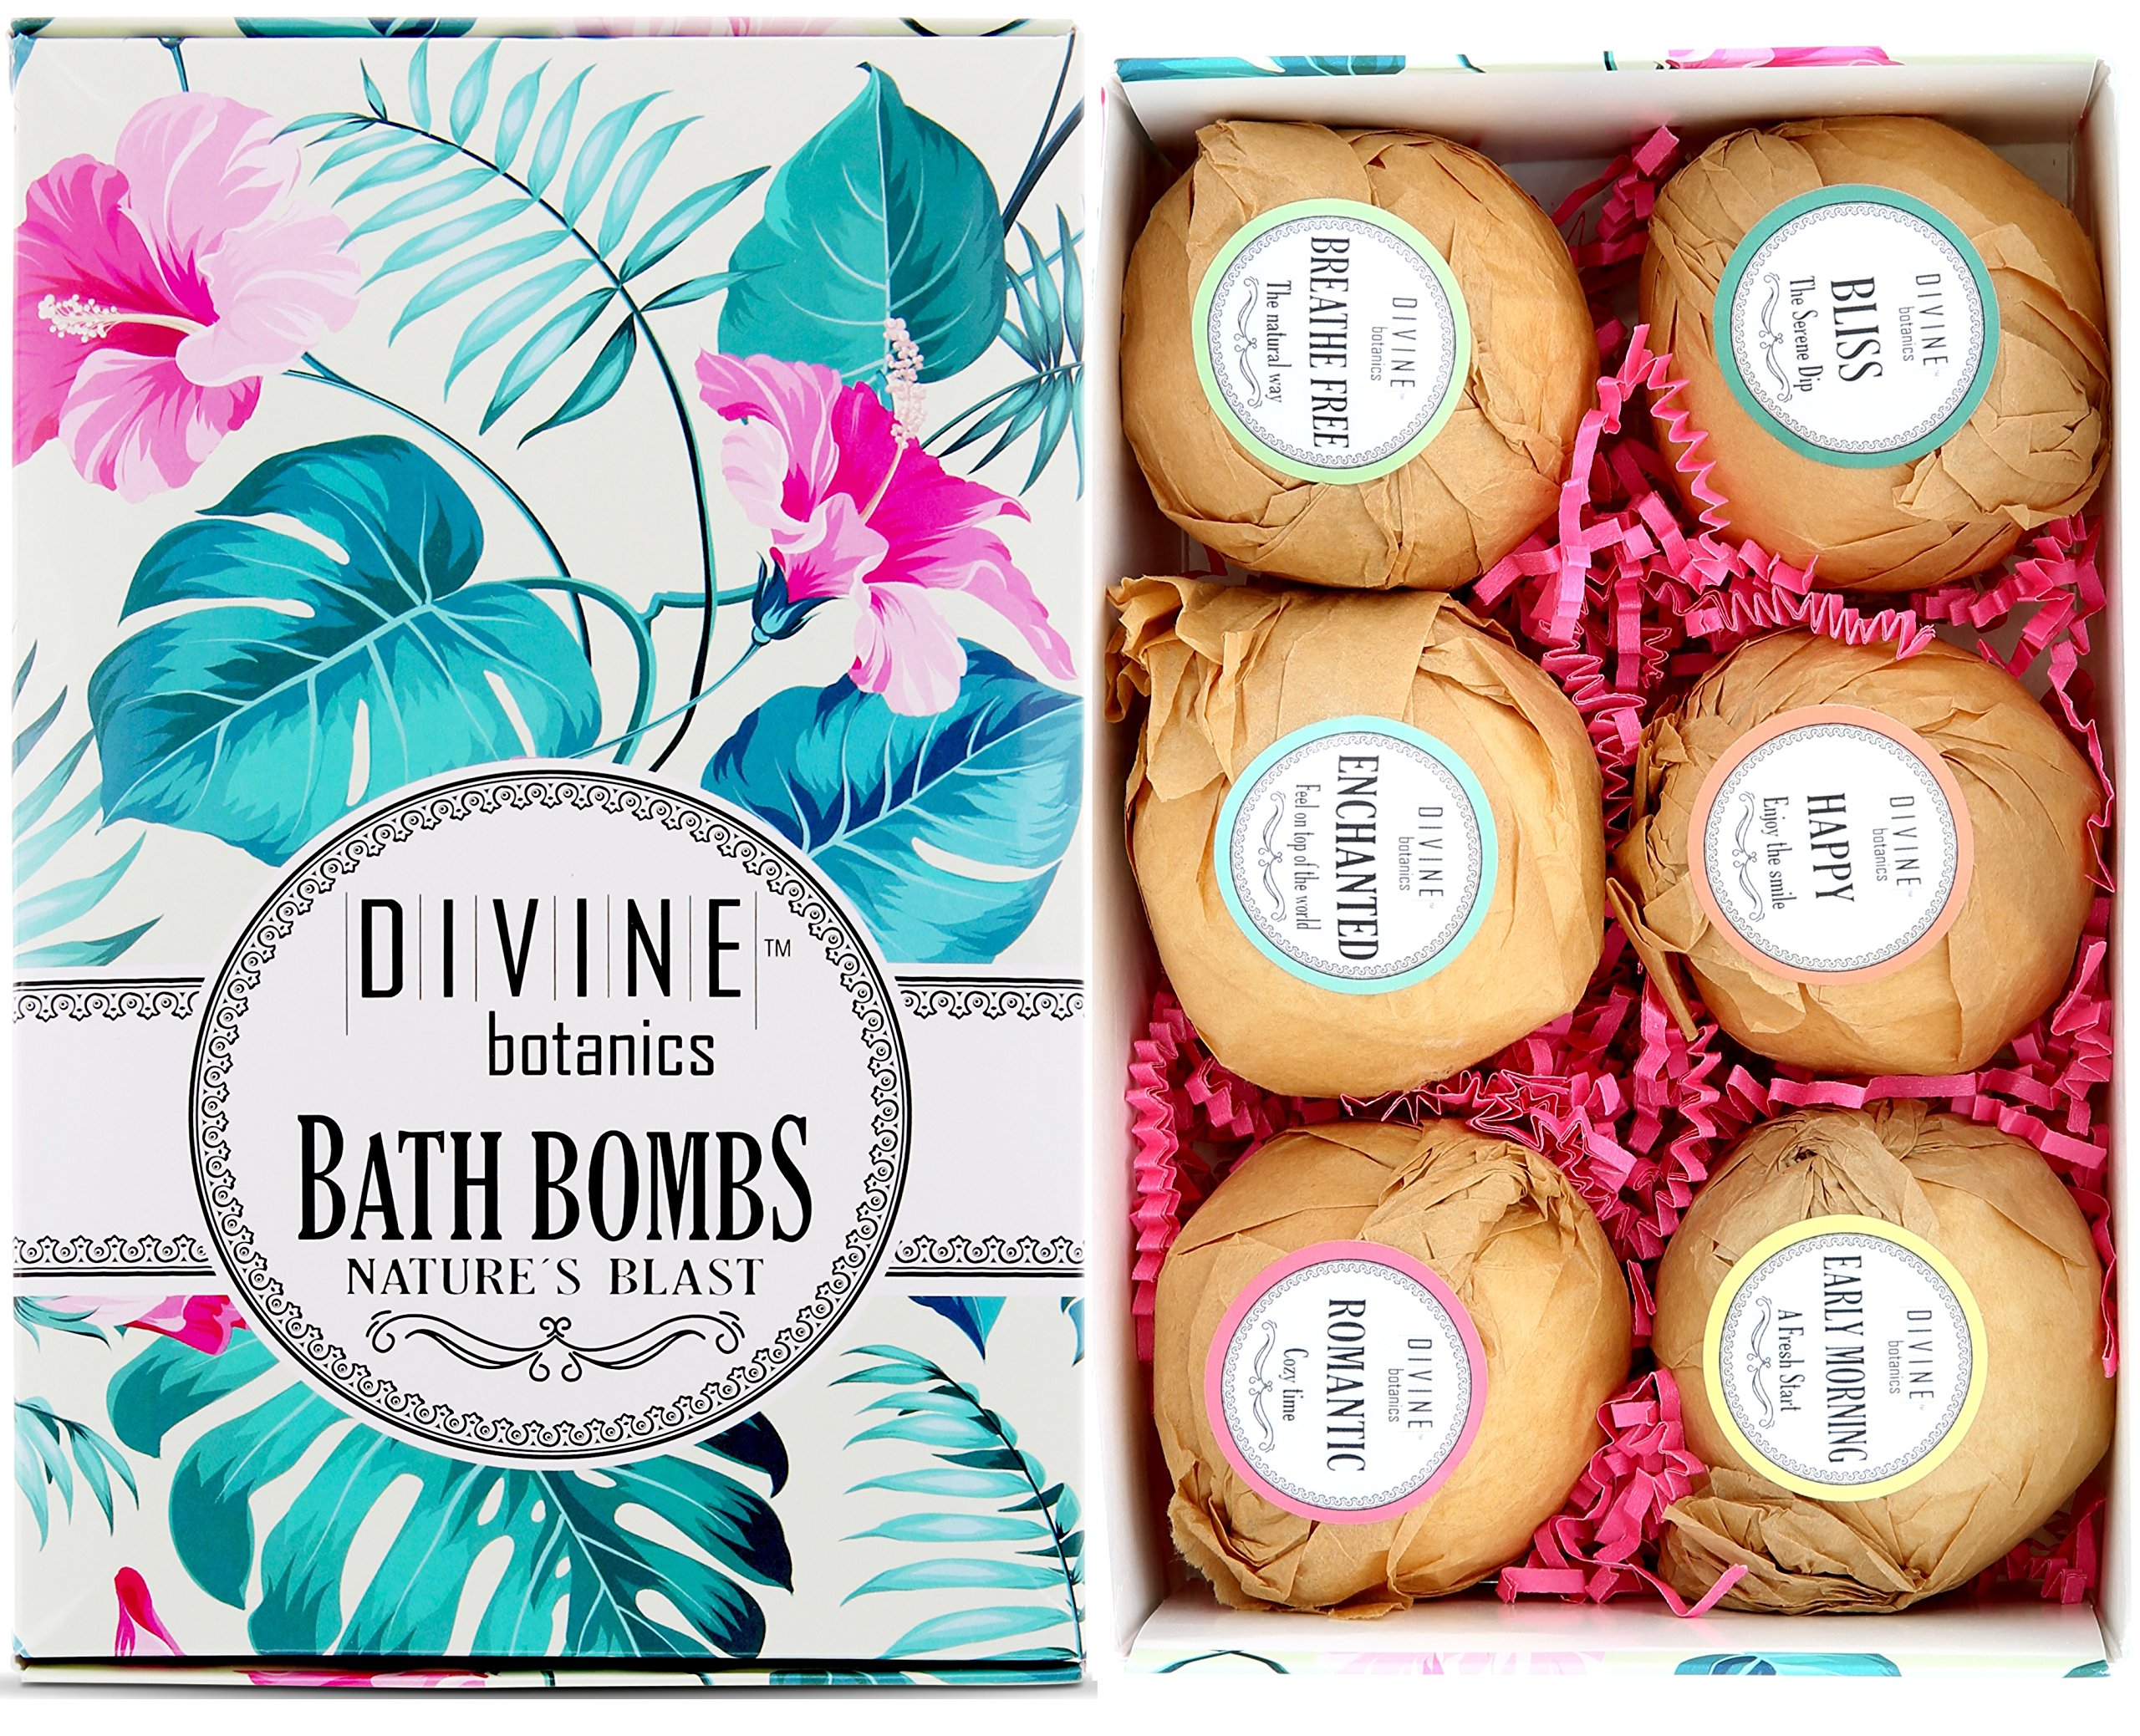 6 XL USA Made Essential Oils Lush Bath Bombs Gift Set - Organic Coconut Oil and Shea Butter - Bath Bombs for Women - Perfect for Bubble & Spa Bath - Christmas Gifts for Women